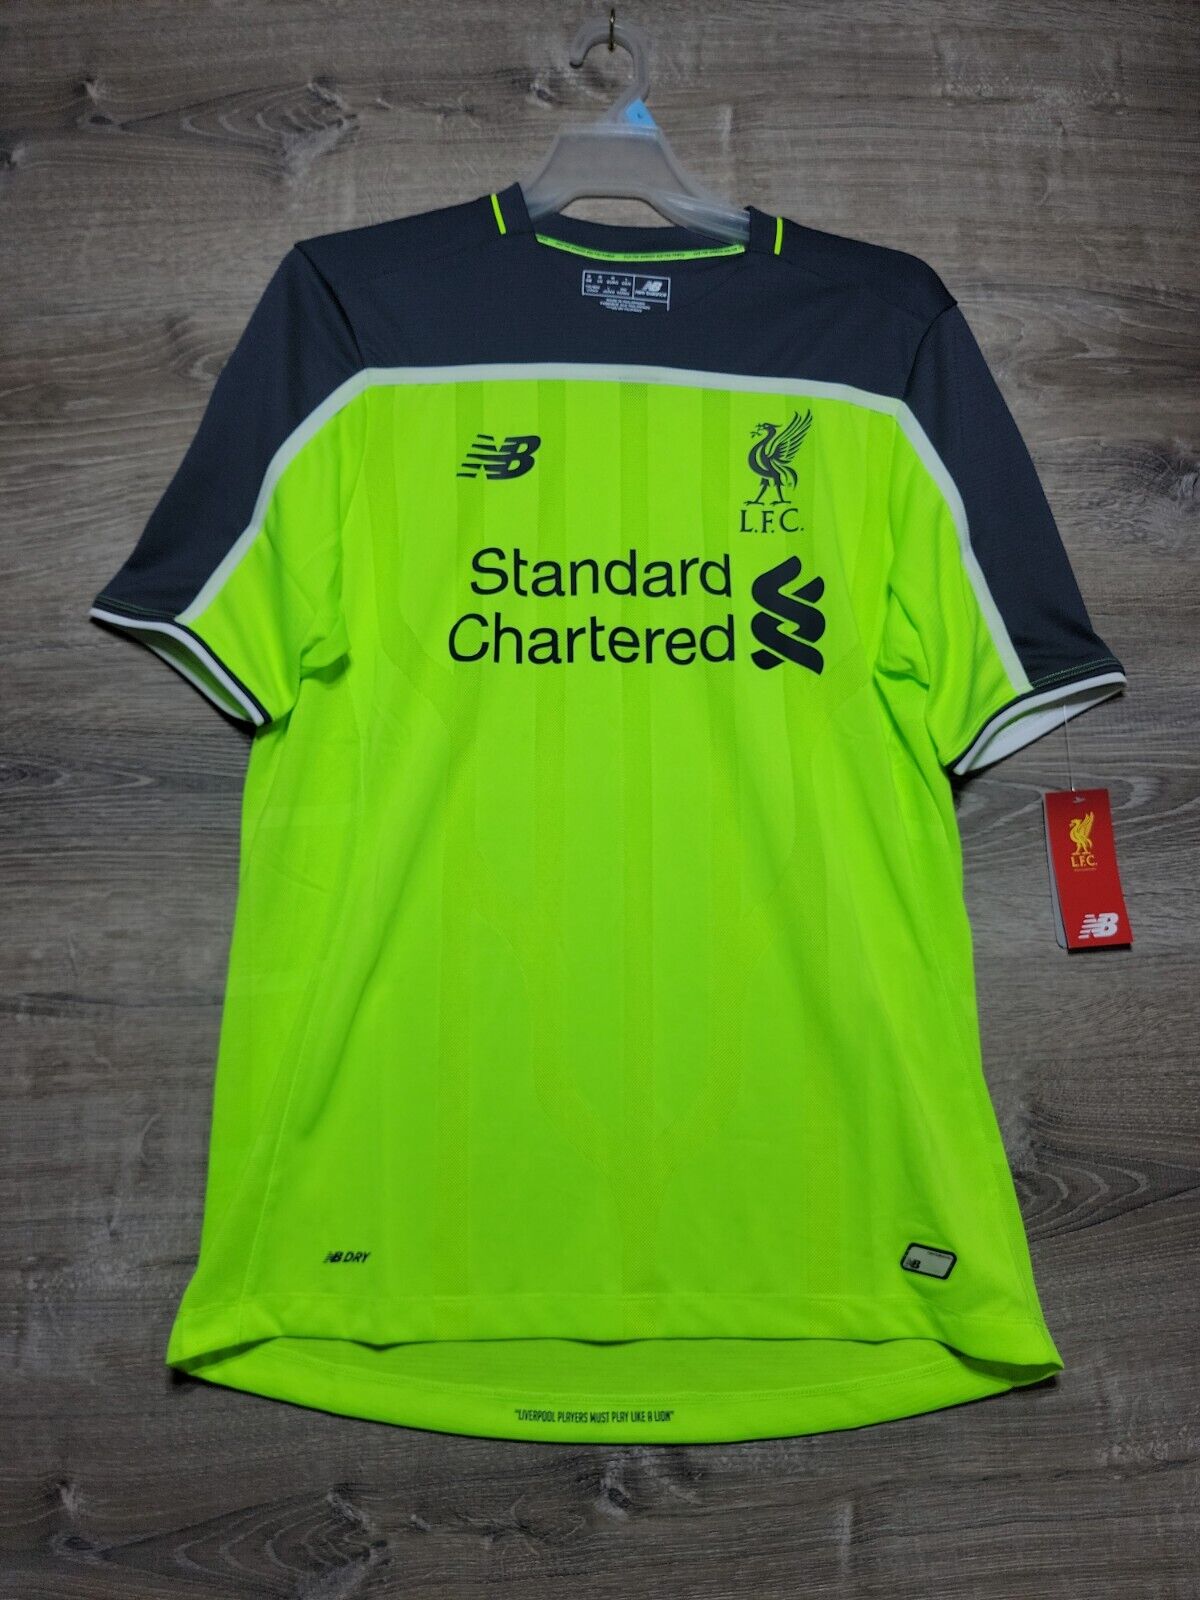 couscous aflivning Sandet 2016/17 Liverpool Third Jersey New Balance Neon Green NEW With Tags Size M  | eBay